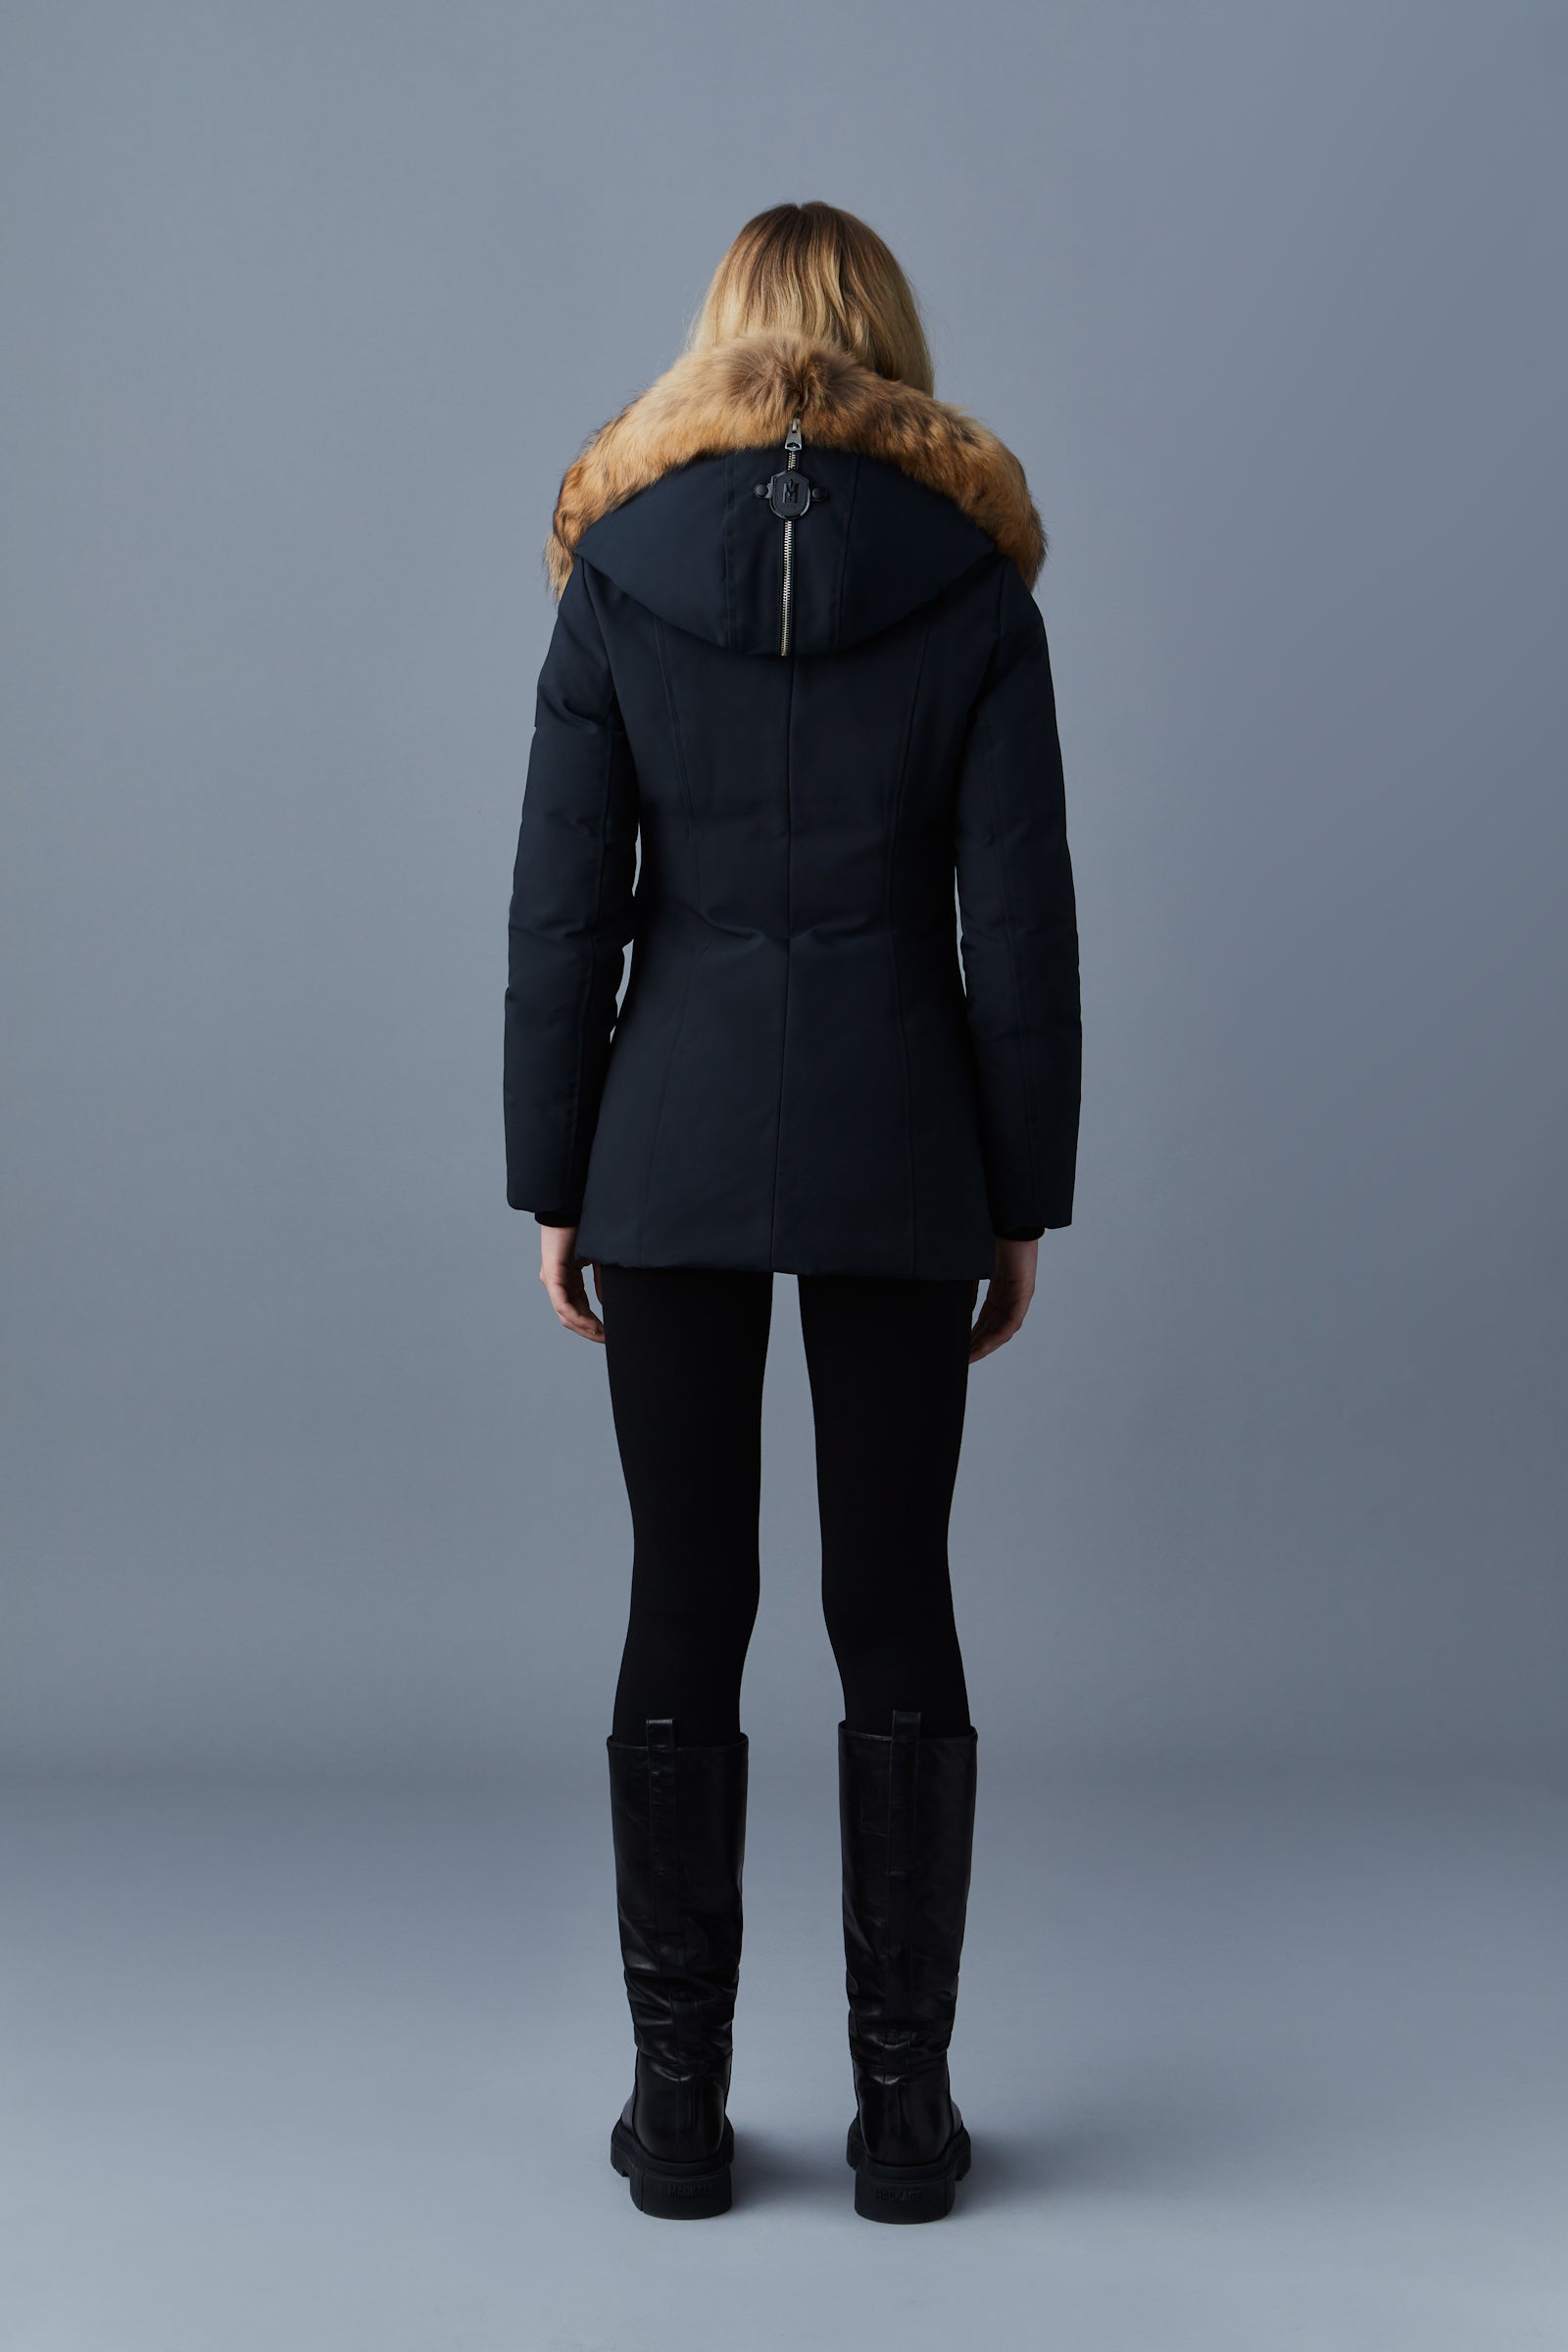 Women's Coats with Fur Hood, Explore our New Arrivals